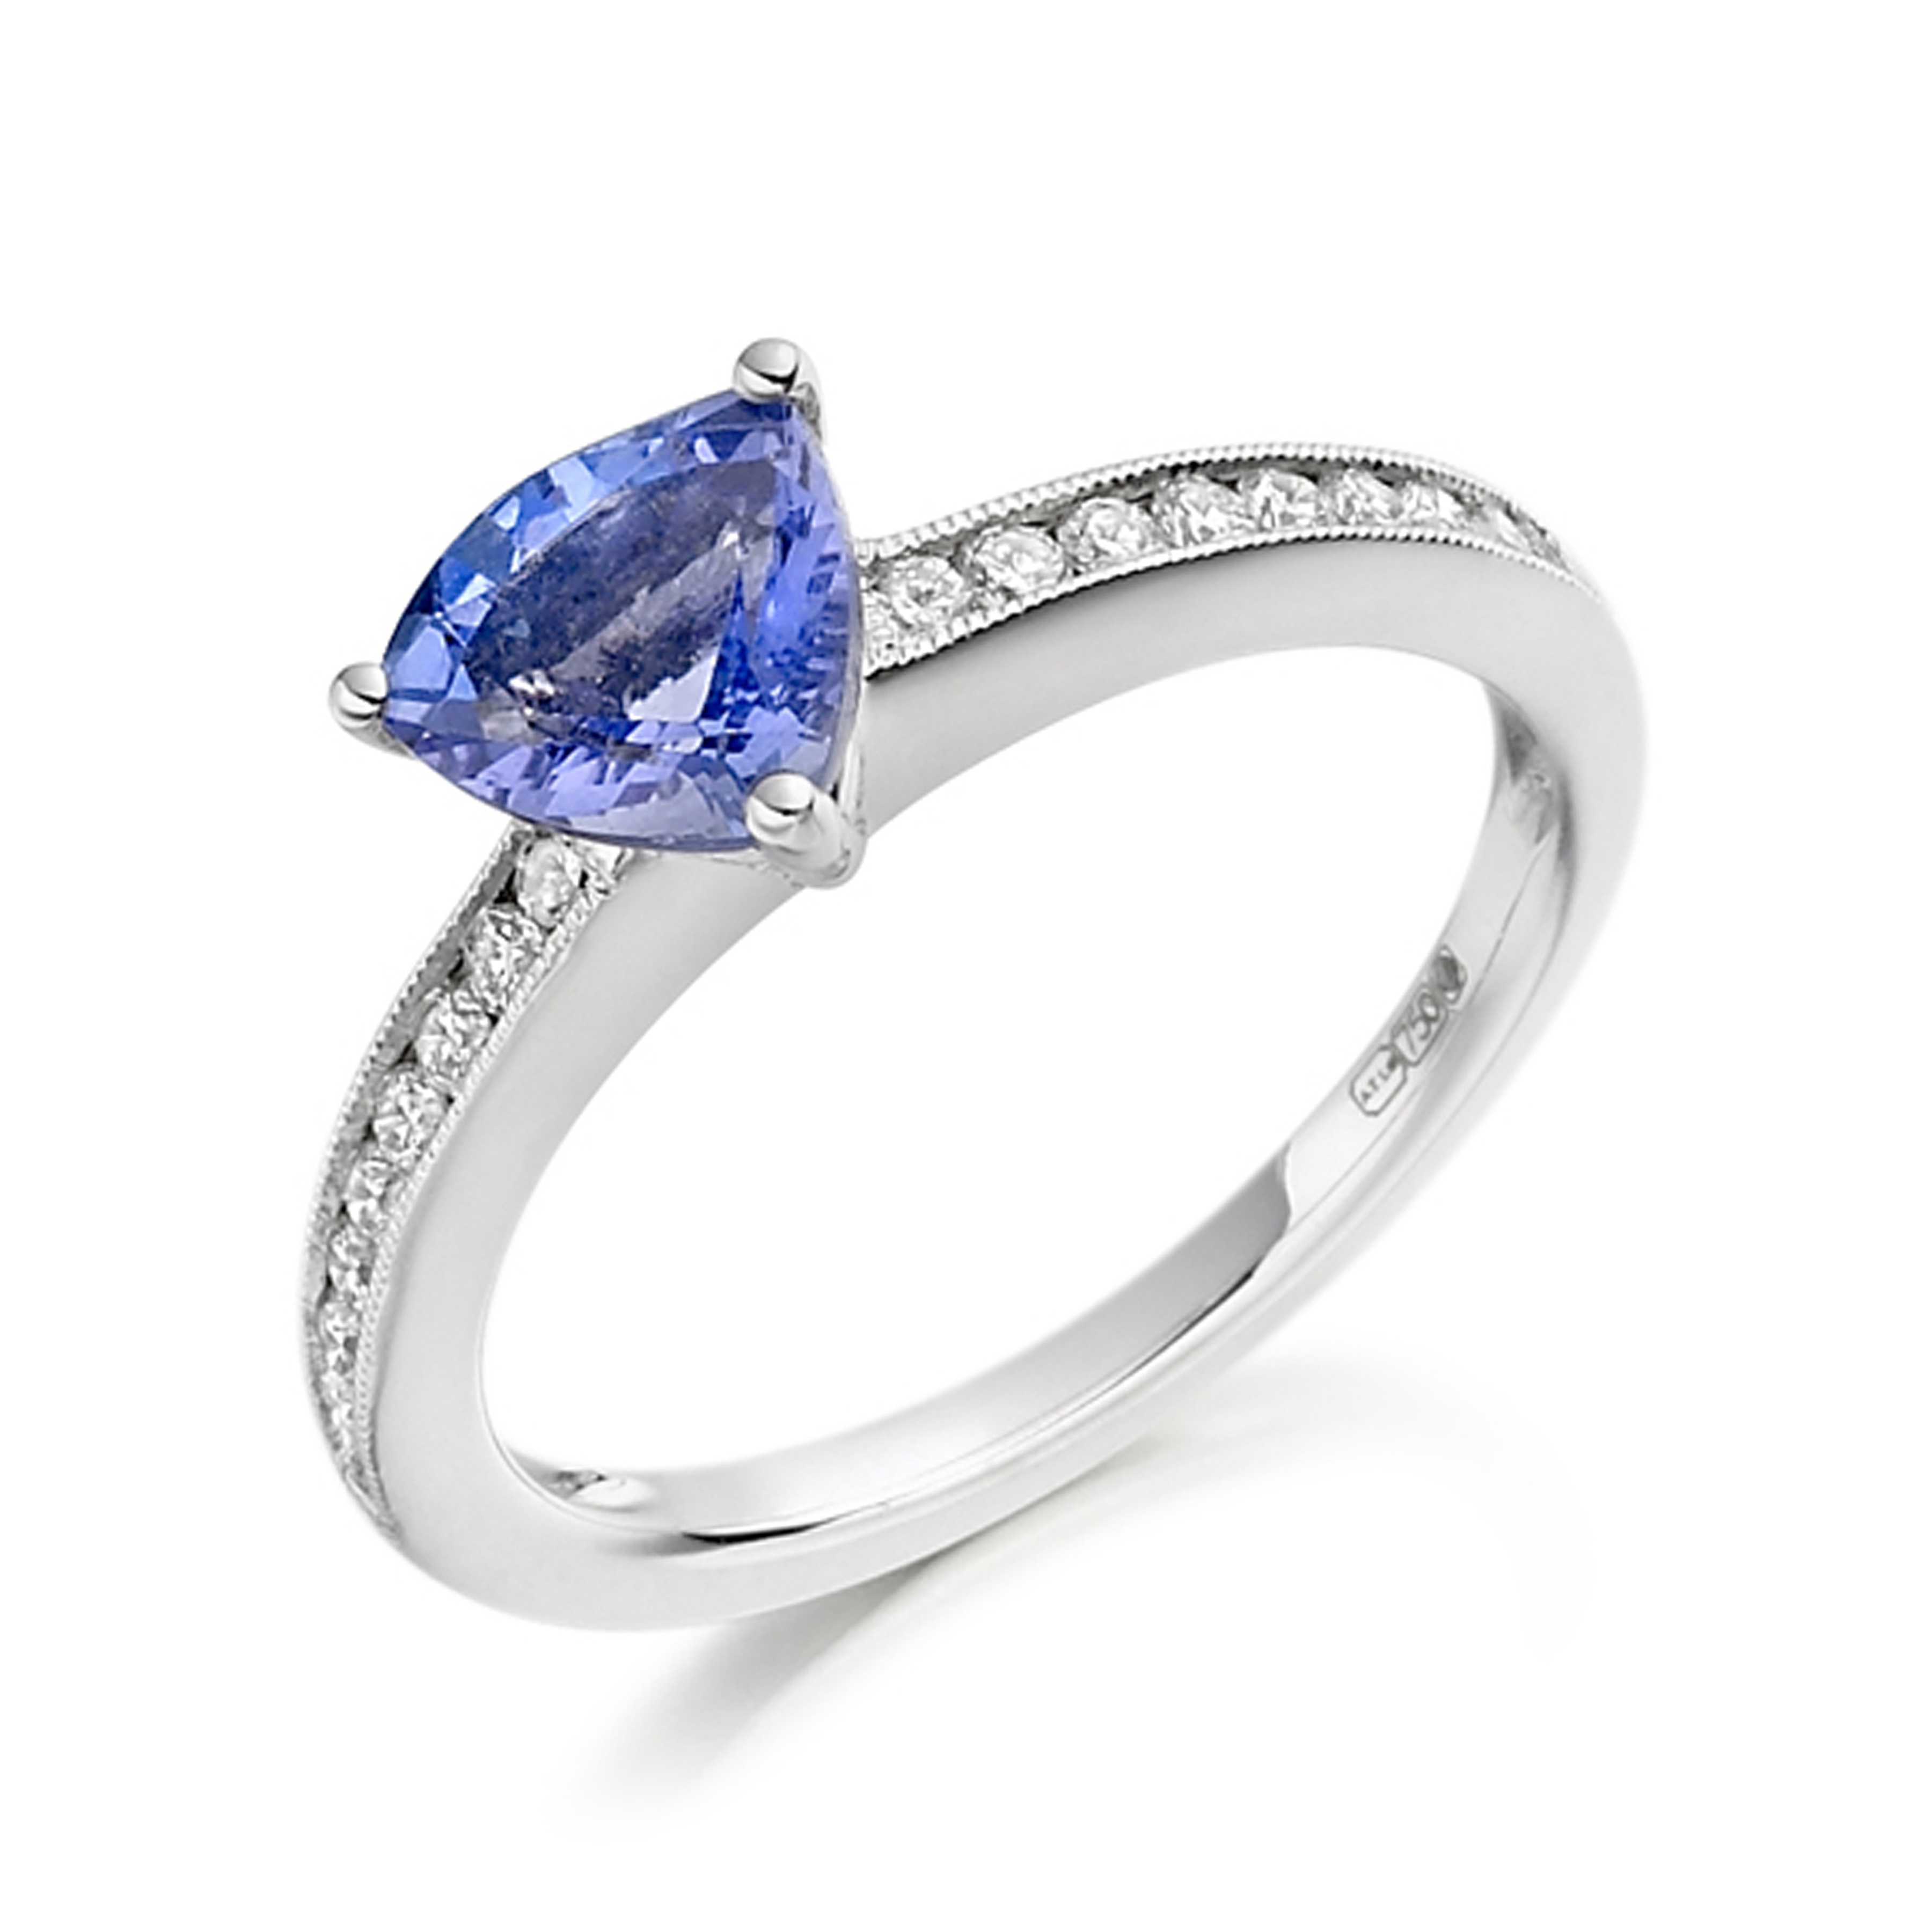 6mm Trillion Curved Tanzanite Stones On Shoulder Diamond And Gemstone Engagement Ring